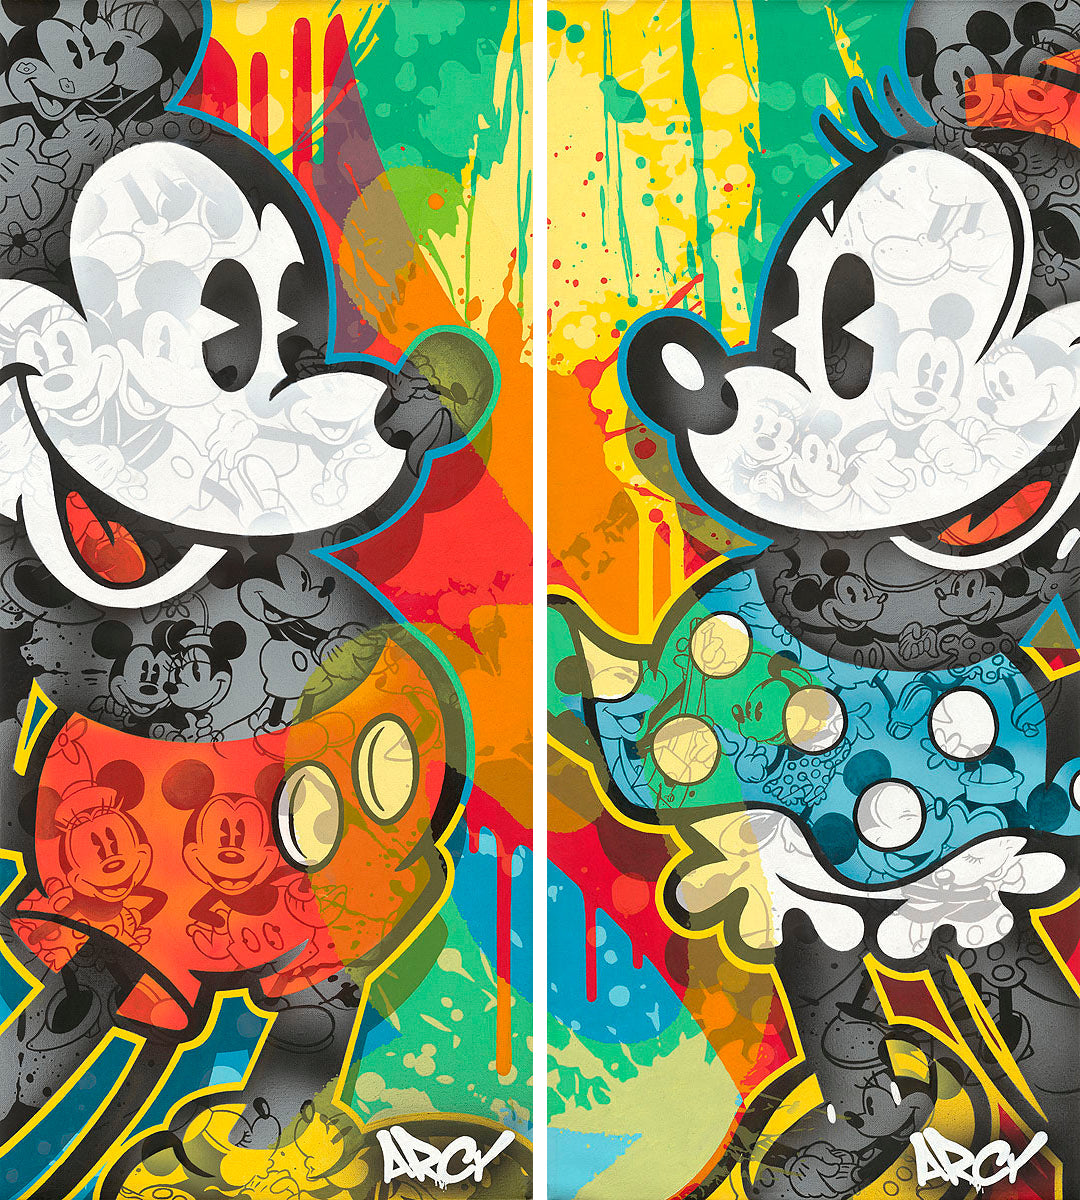 2 Lot Mickey Mouse and Minnie Mouse Disney Fine Art ARCY Signed Limited Edition Prints of 195 on Canvas - I'll Be Your Mickey and Minnie